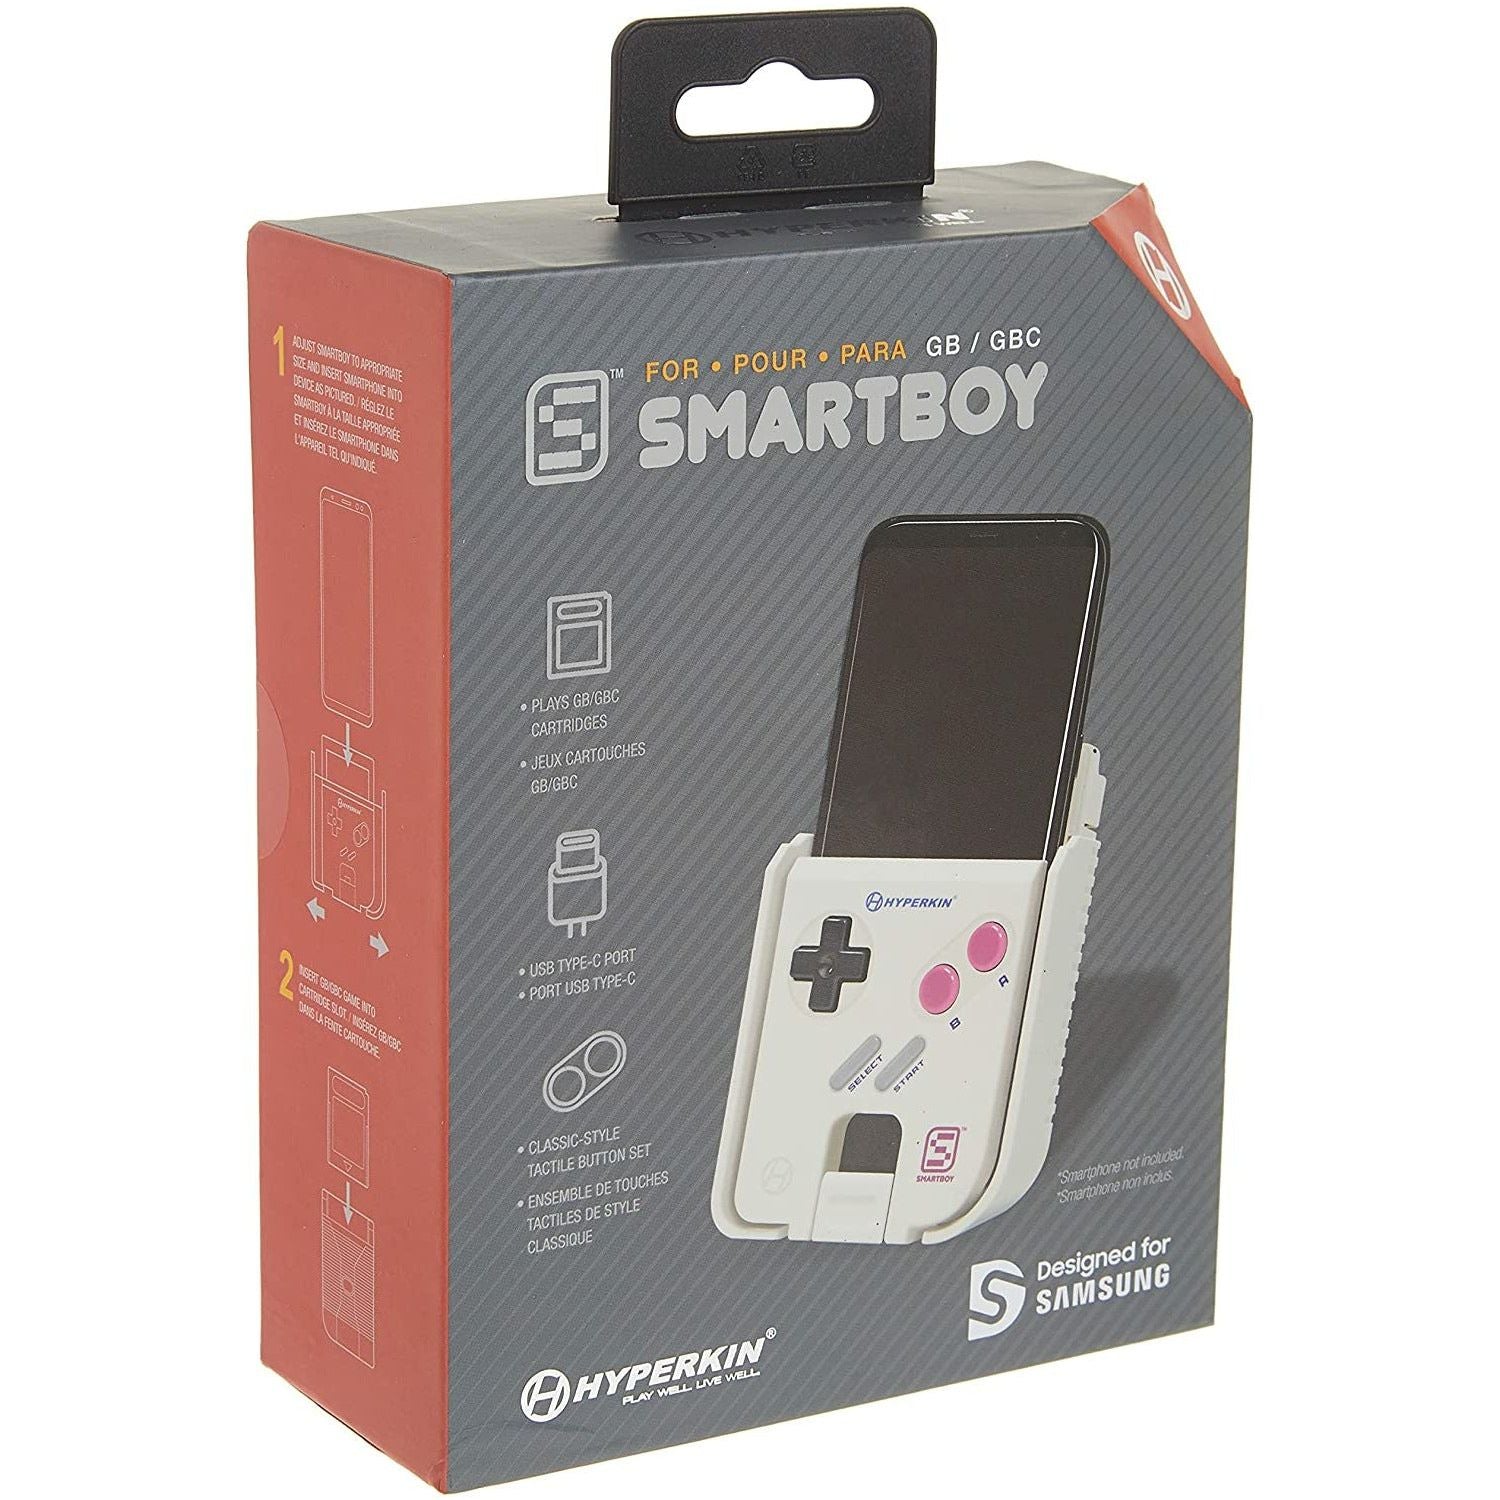 Appareil mobile Smartboy pour Game Boy/Game Boy Color (Android USB Type-C)